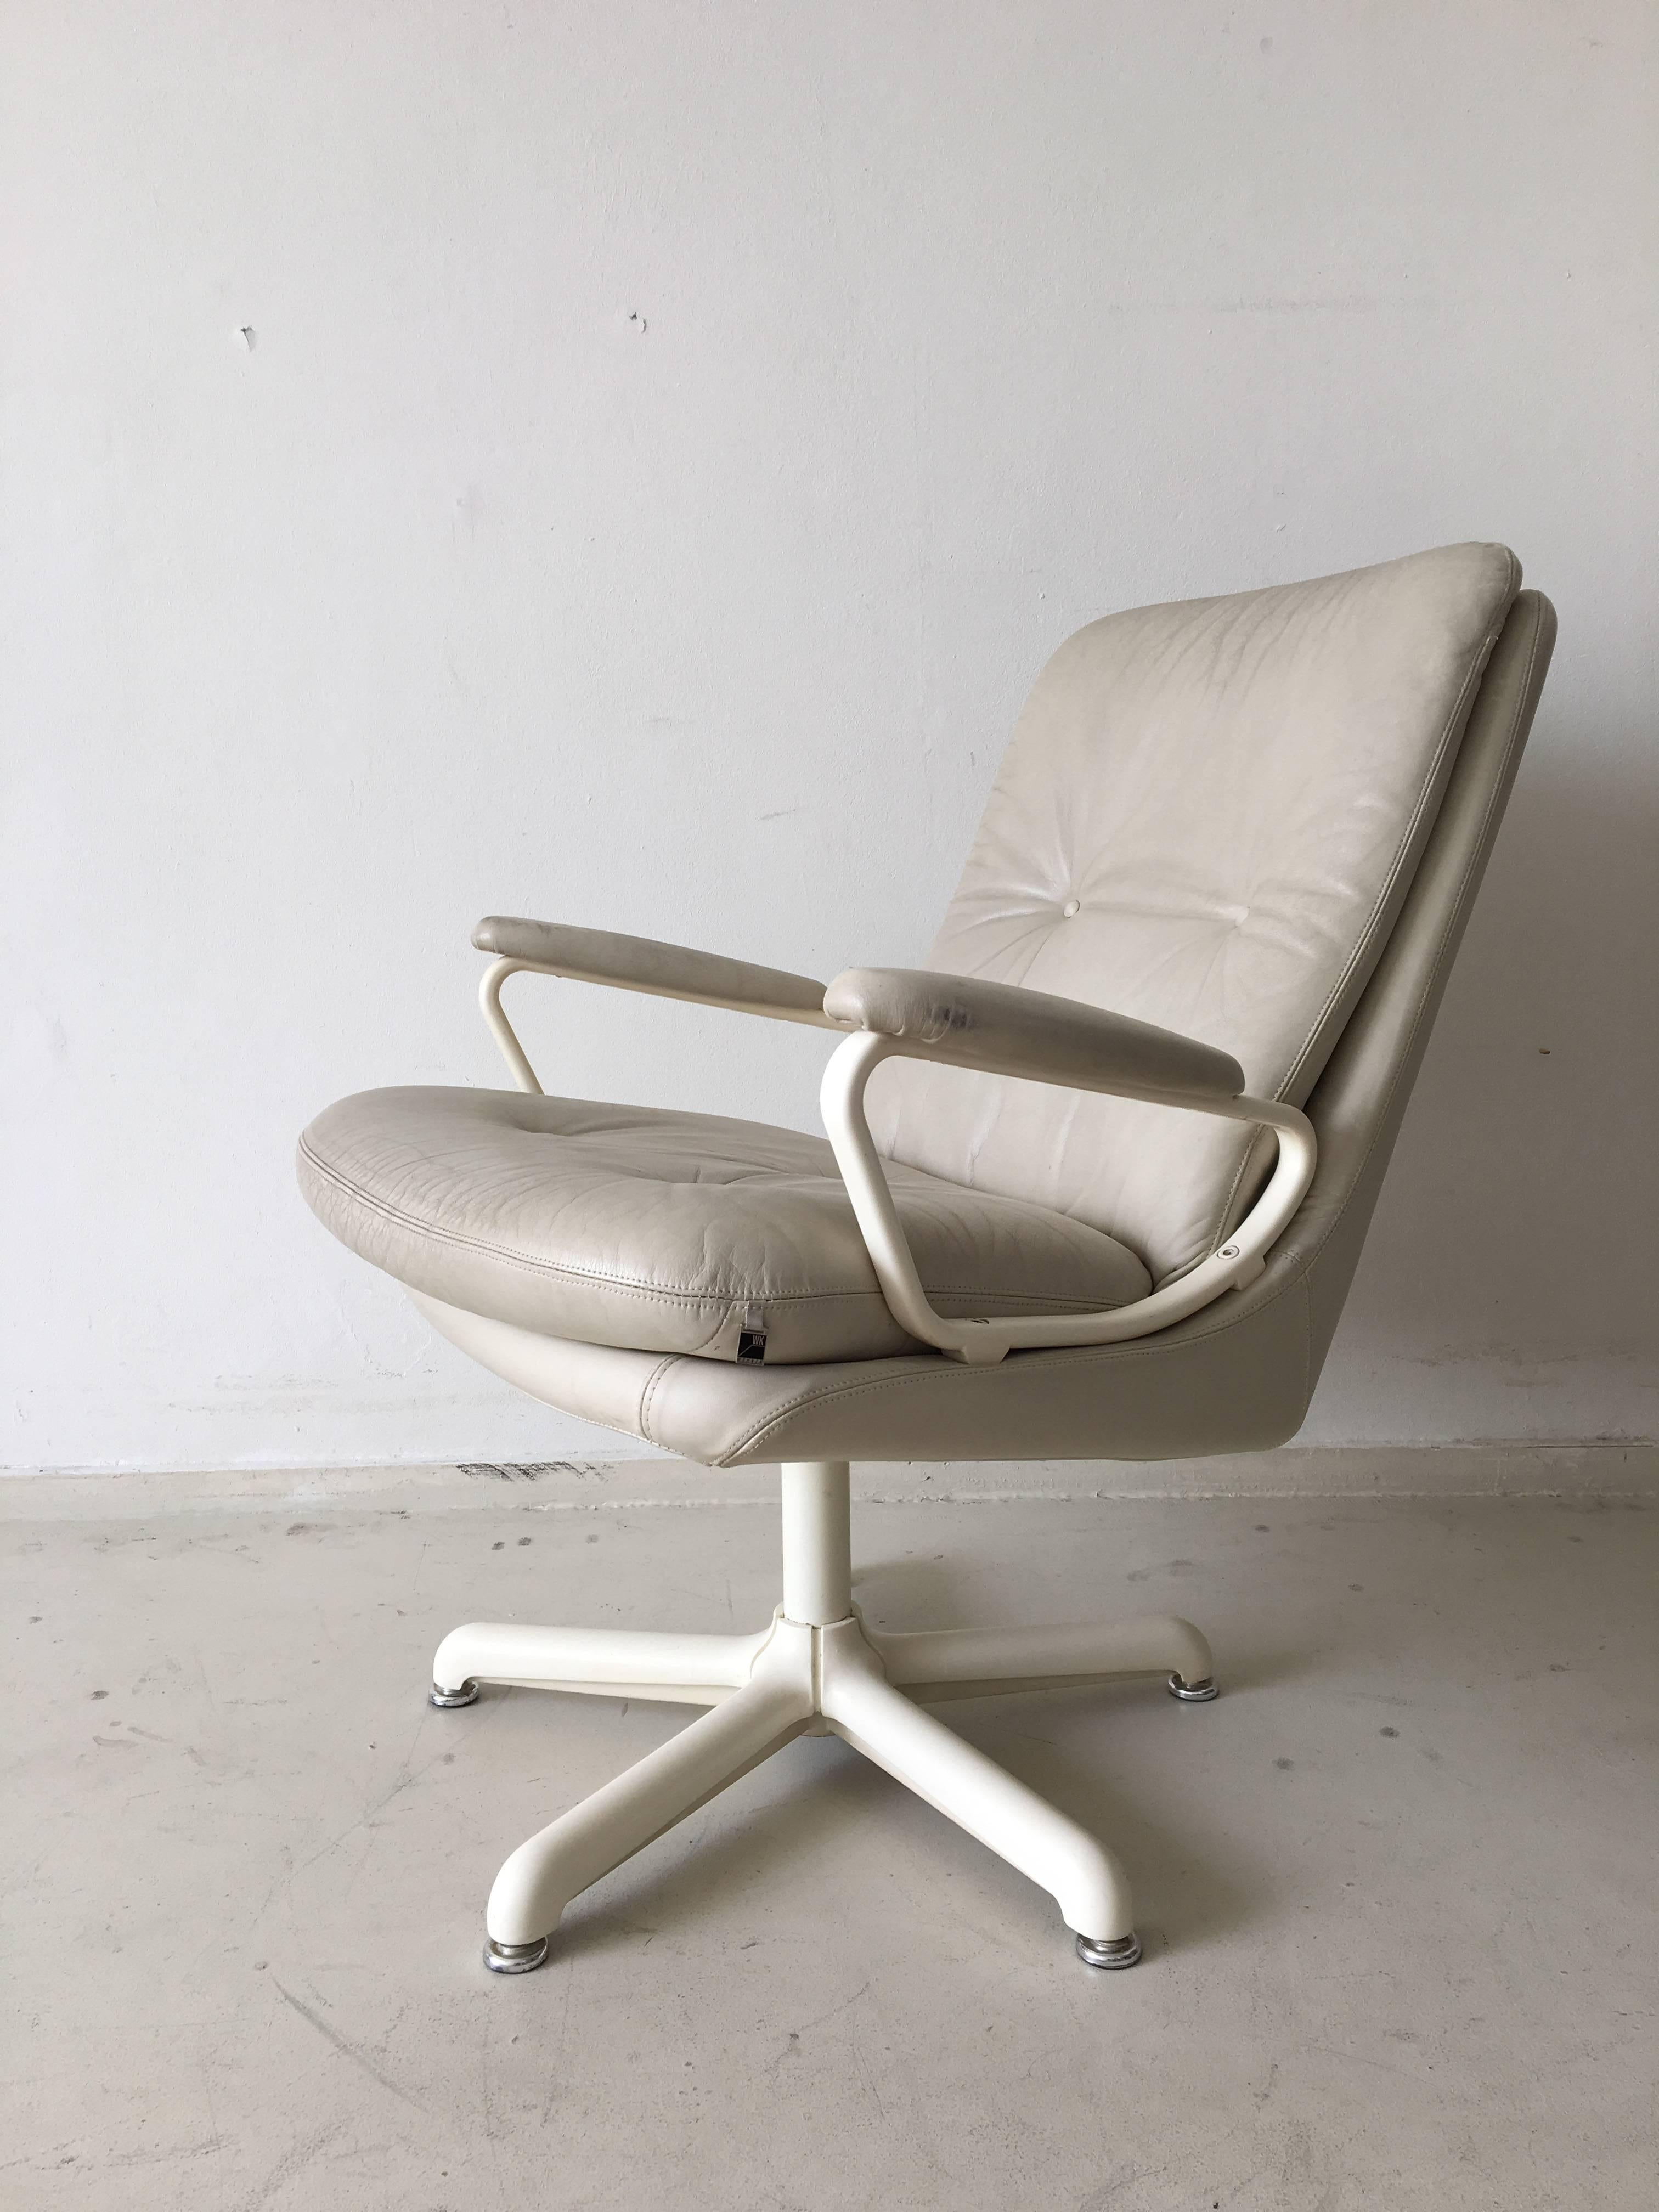 Great design manufactured in Germany, circa 1960s. This model looks very similar with the 'Gentilina' chair from Strässle which was designed by André Vandenbeuck. The chair remains in sturdy condition with wear (no tears, see photos). Very